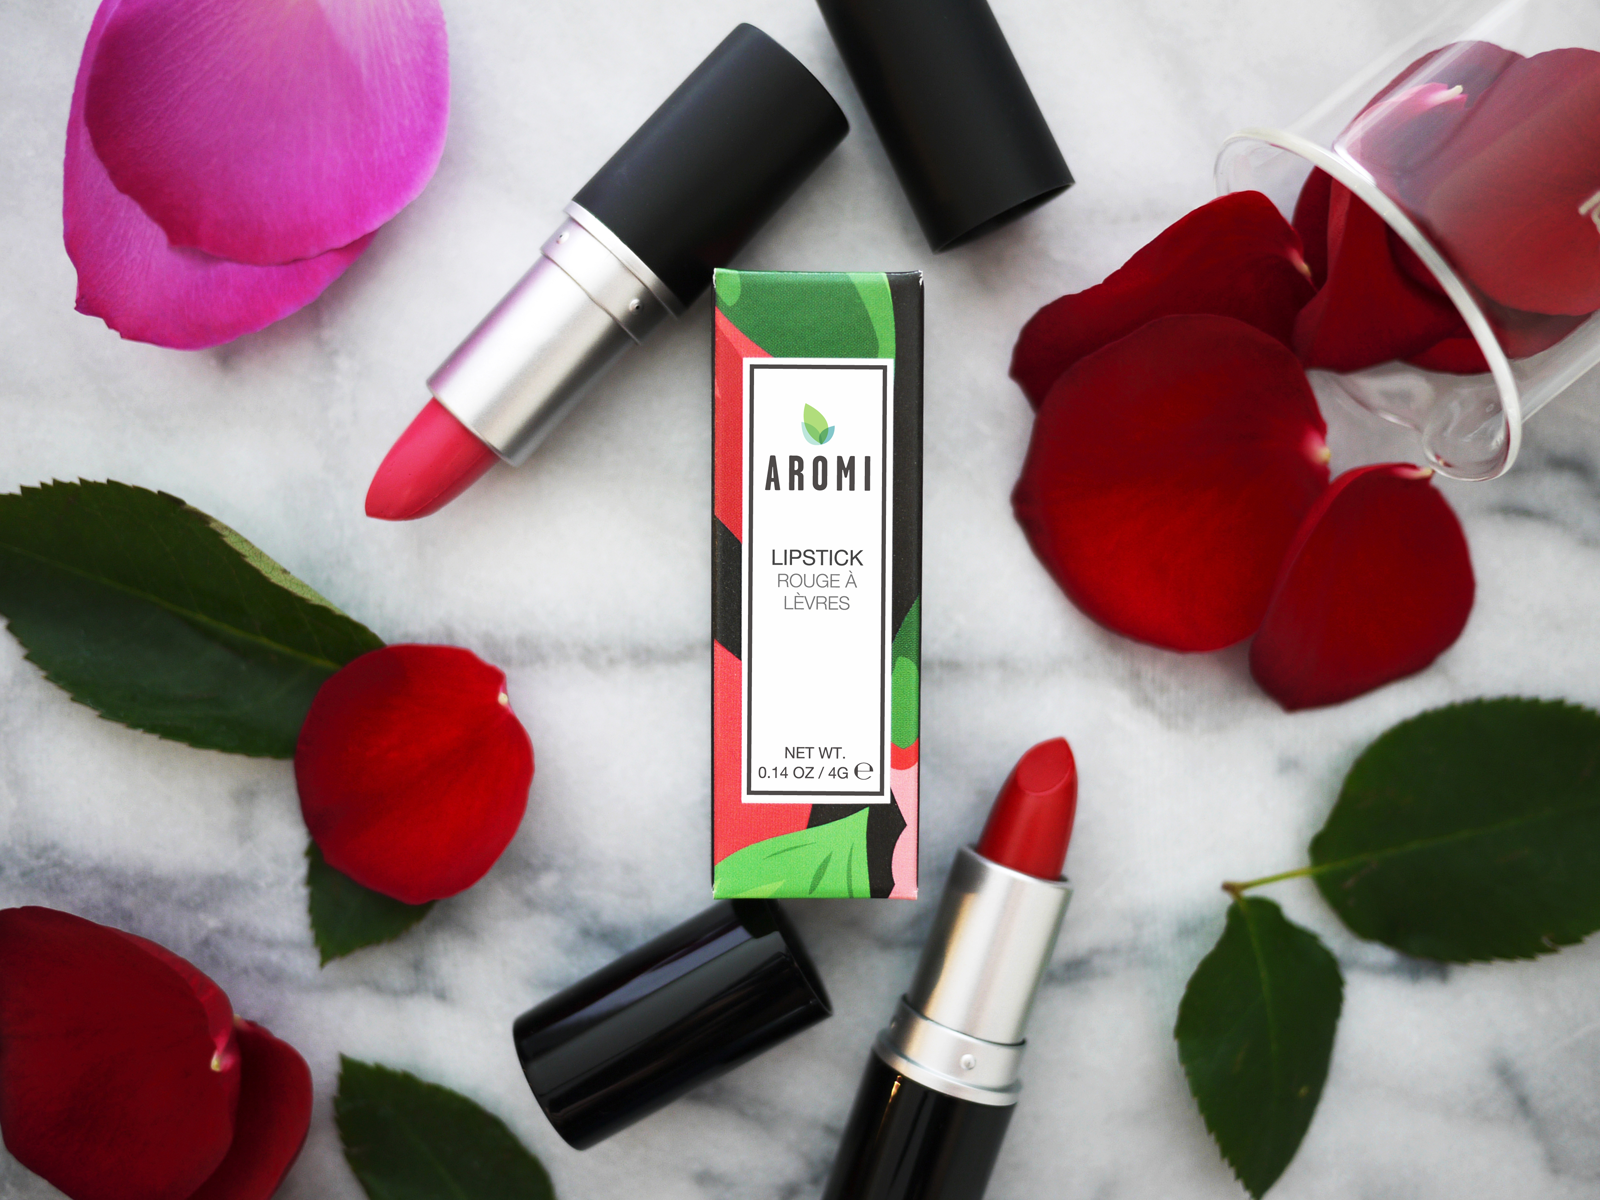 Aromi Handmade Lipstick - Jacqueminot Lipstick is featured in the photos. All Aromi lipsticks are handcrafted in small batches, vegan and cruelty-free, and are made with only the finest raw materials.